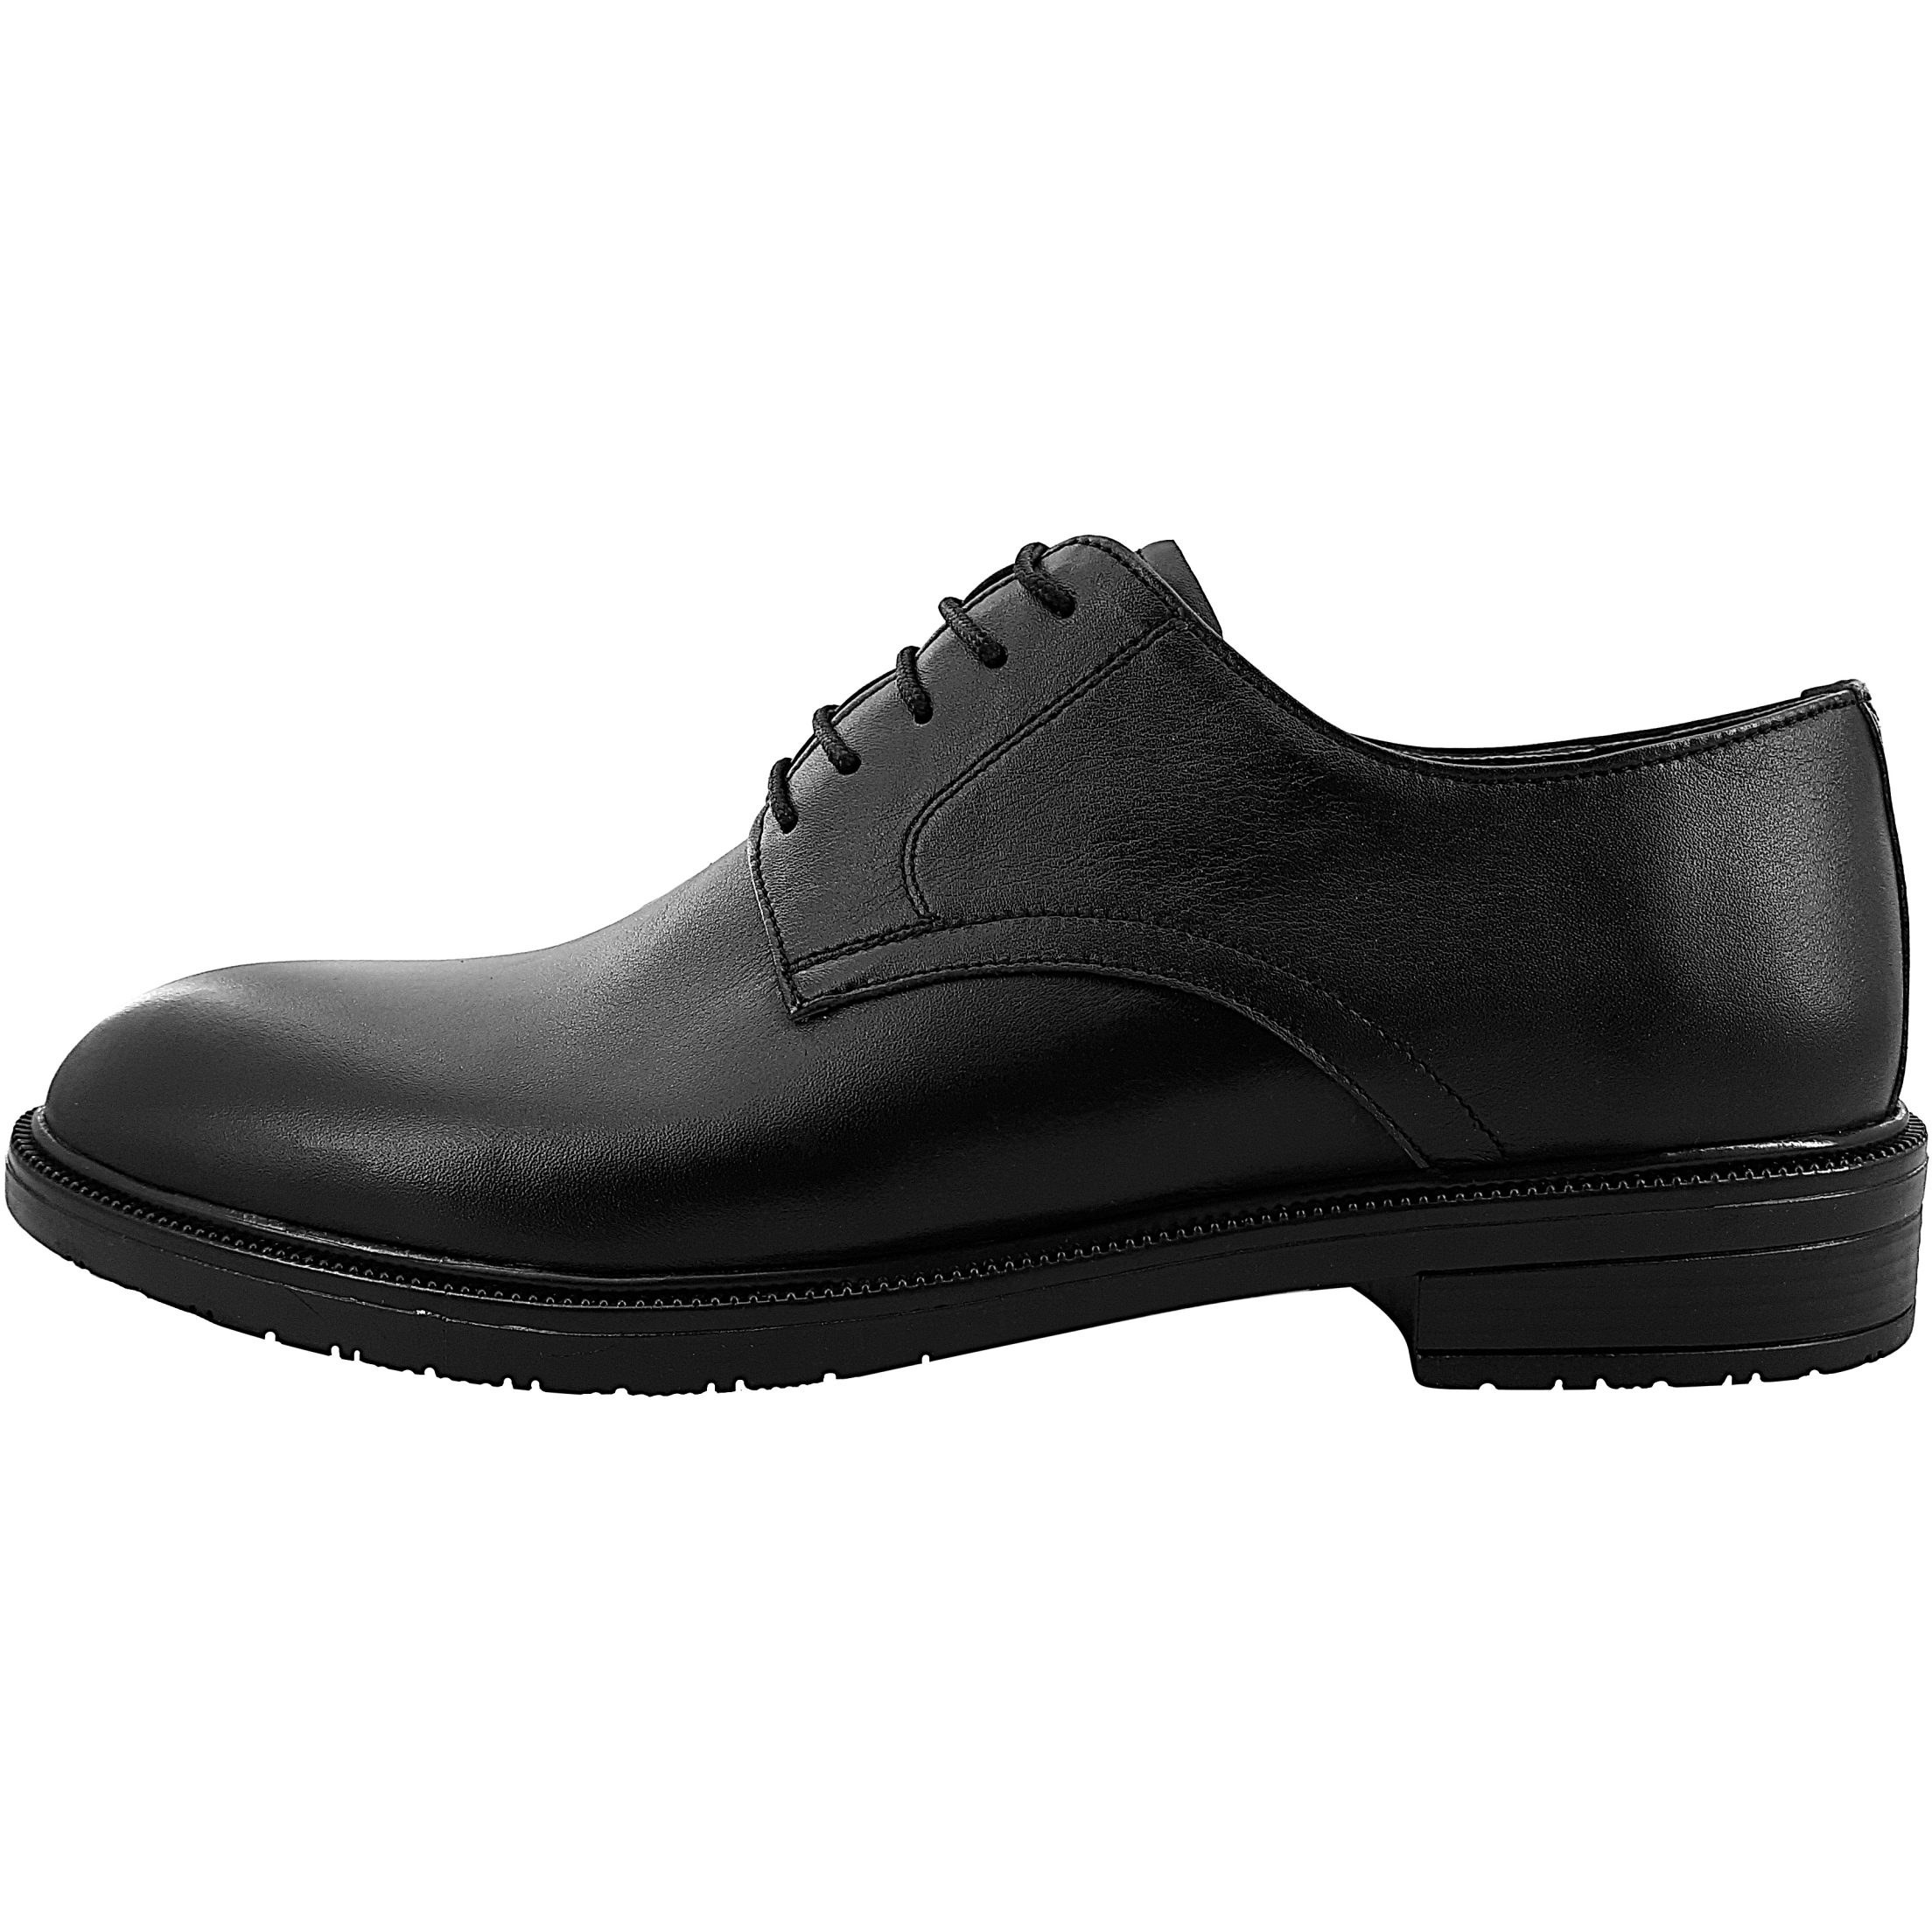 Buying leather oxford shoes outfit + best price